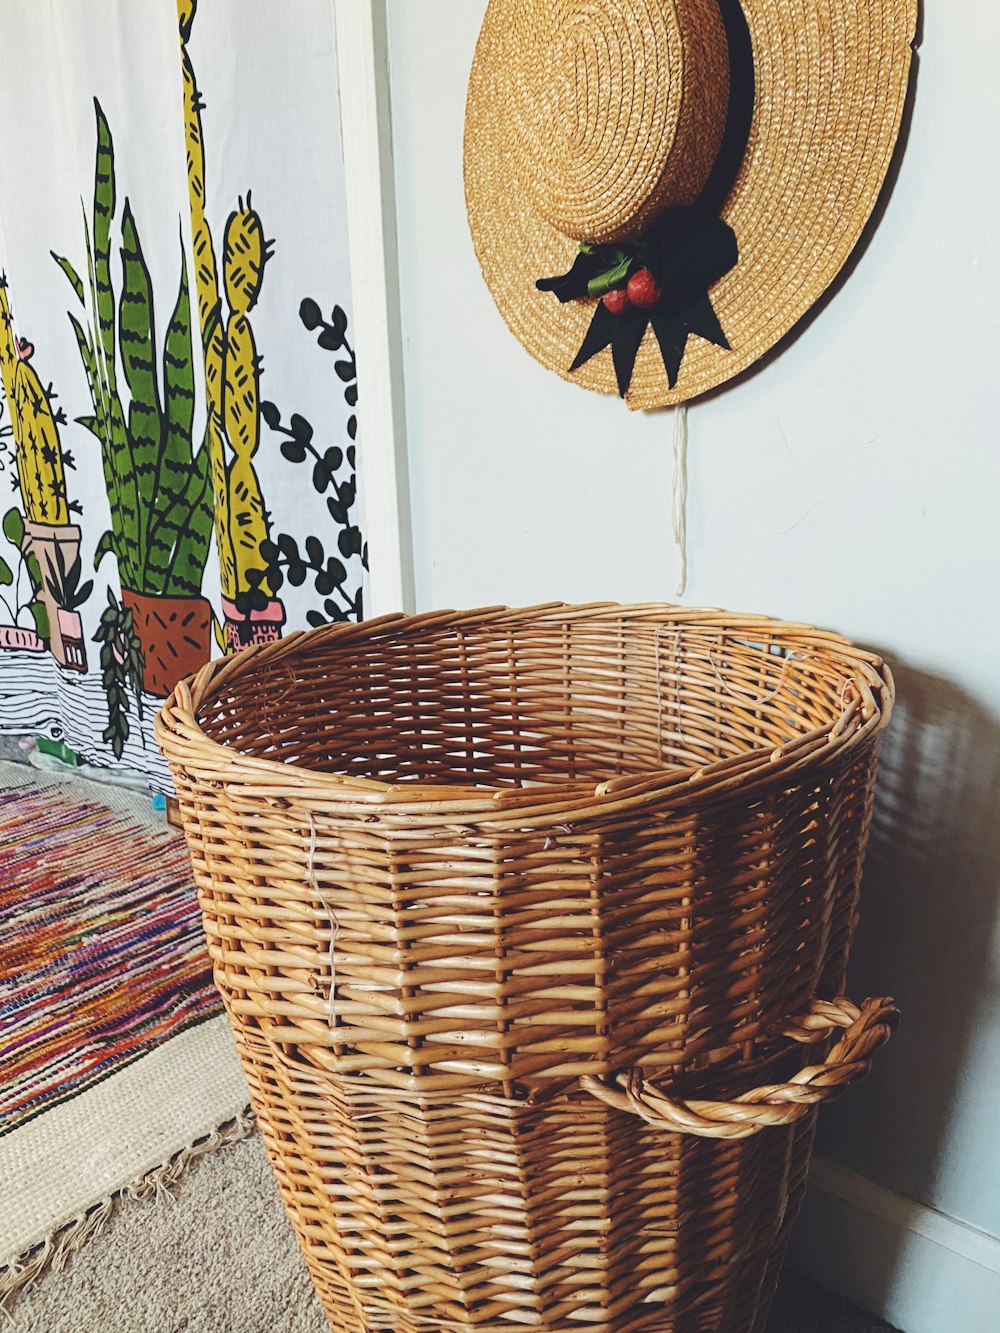 a wicker basket with a hat hanging on the wall